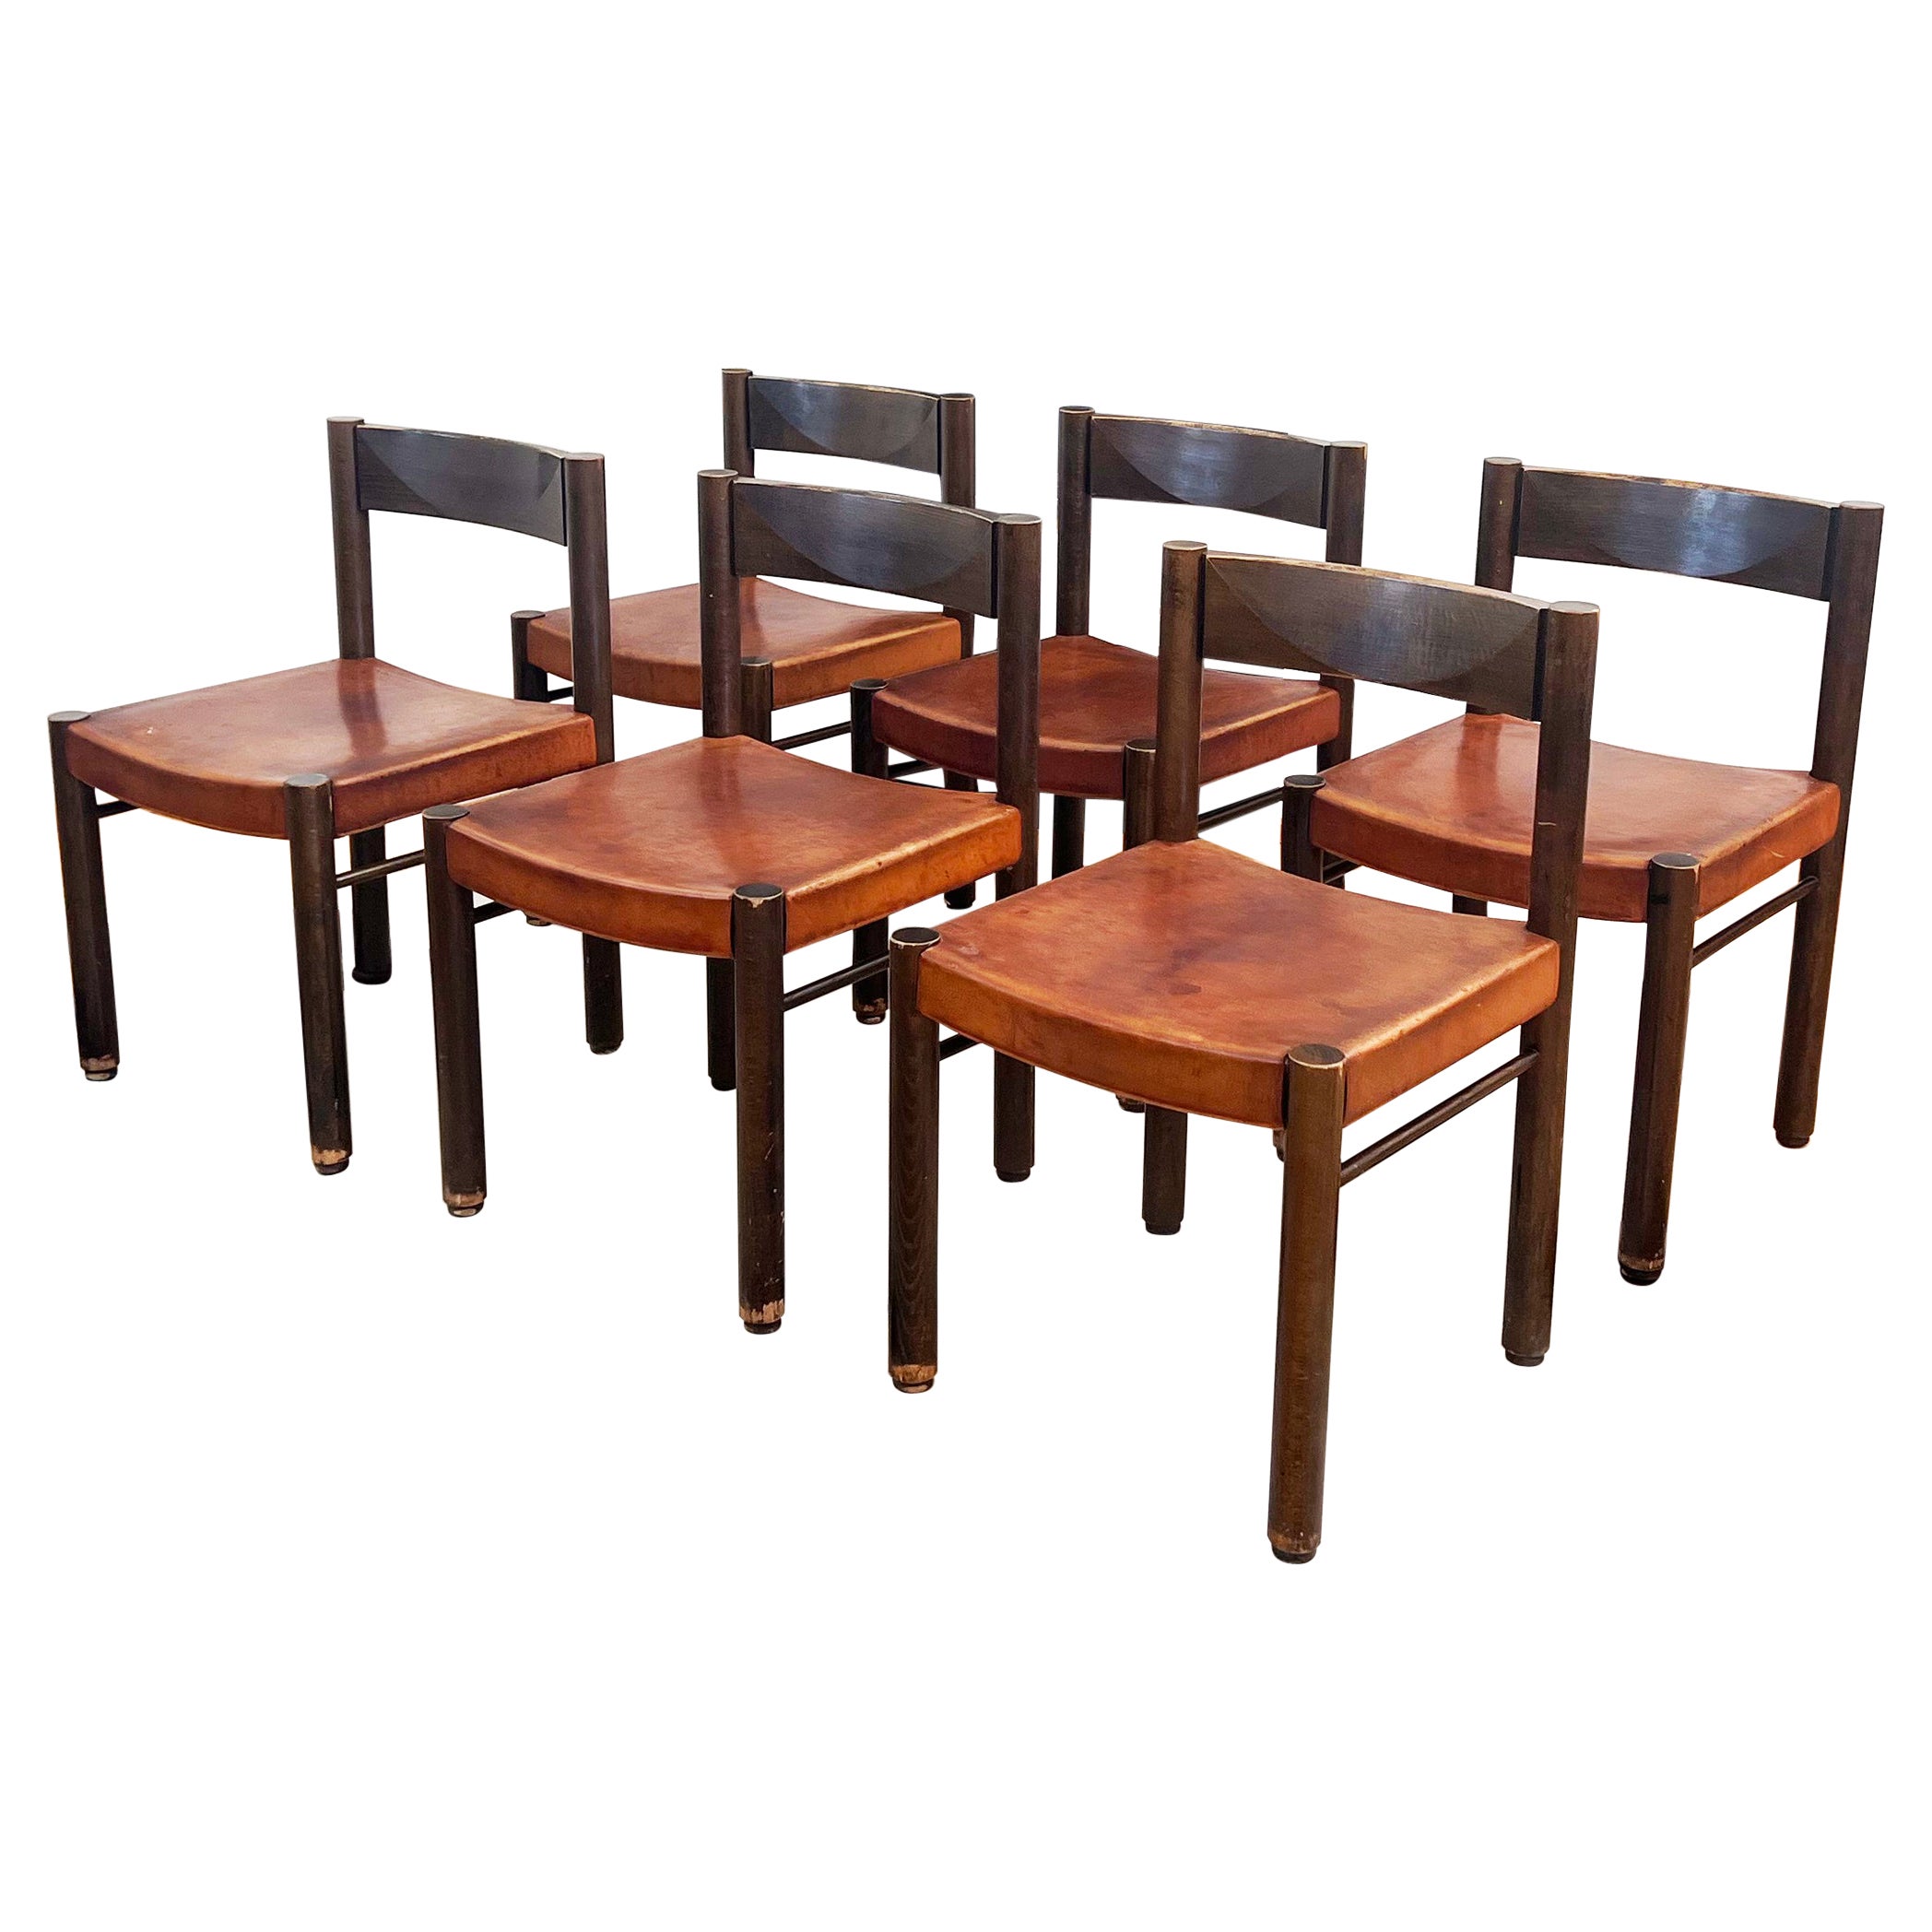 Robert and Trix Haussmann Tiger Oak and Saddle Leather Dining Chairs Midcentury